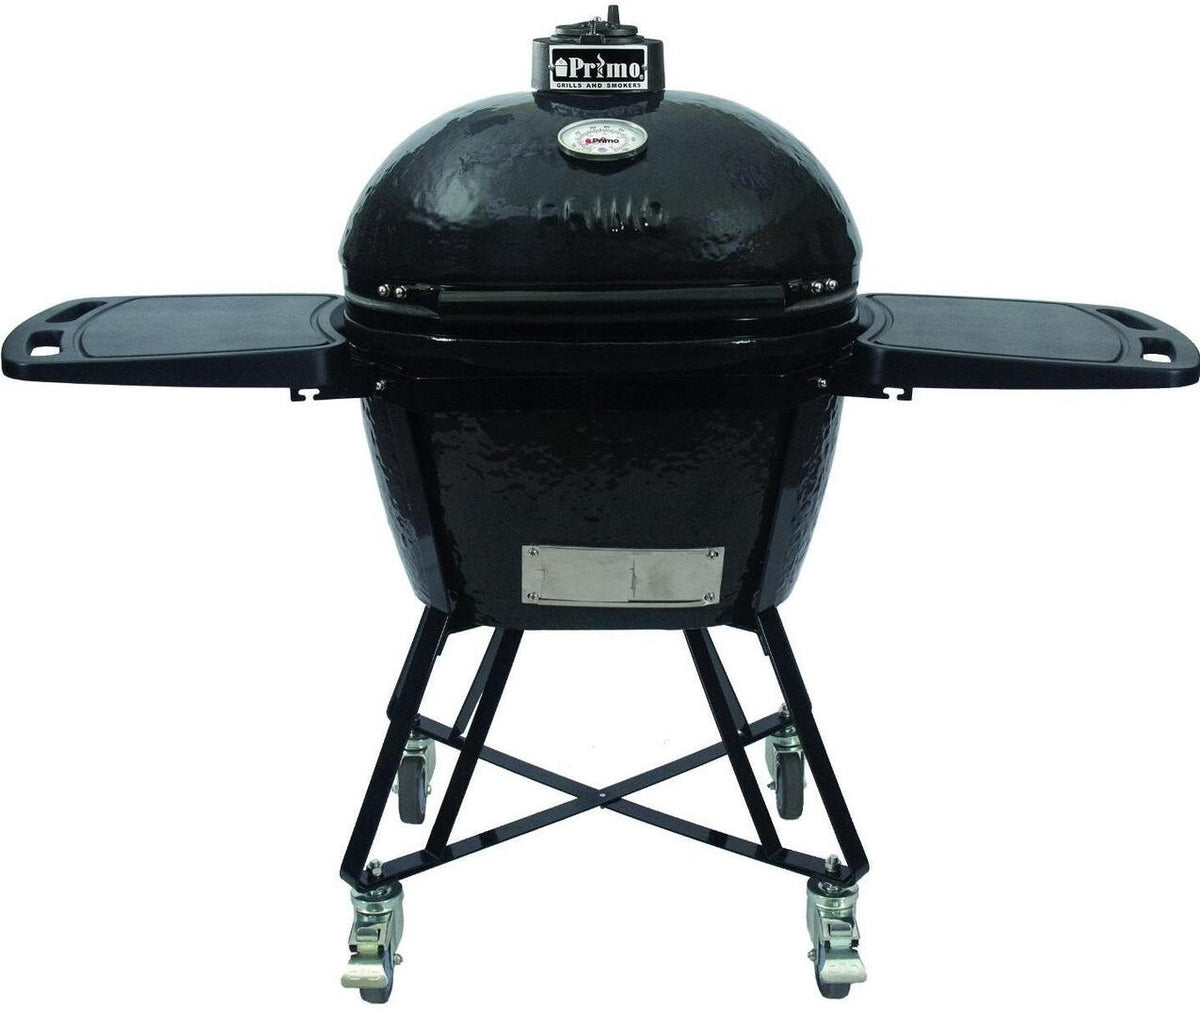 Primo All-in-One Oval LG 300 24 Inch Ceramic Kamado Charcoal Grill Front View